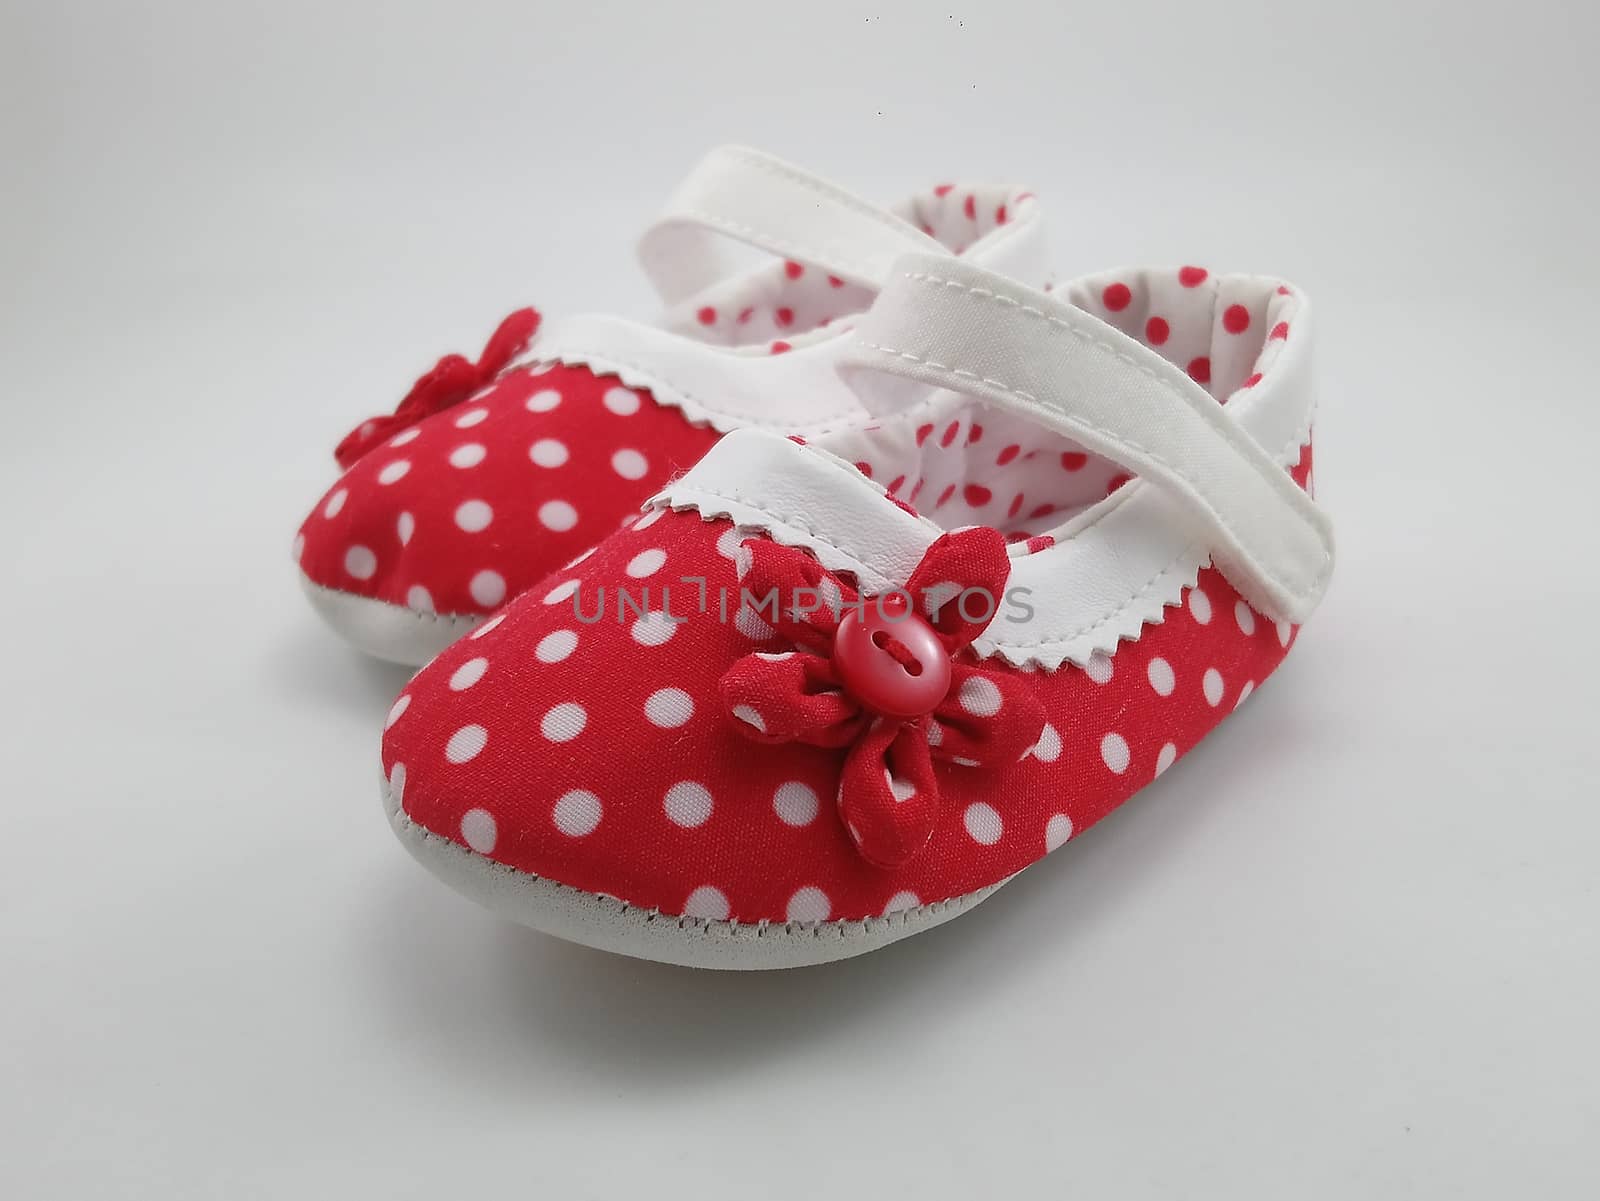 Red polka dots baby shoes by imwaltersy